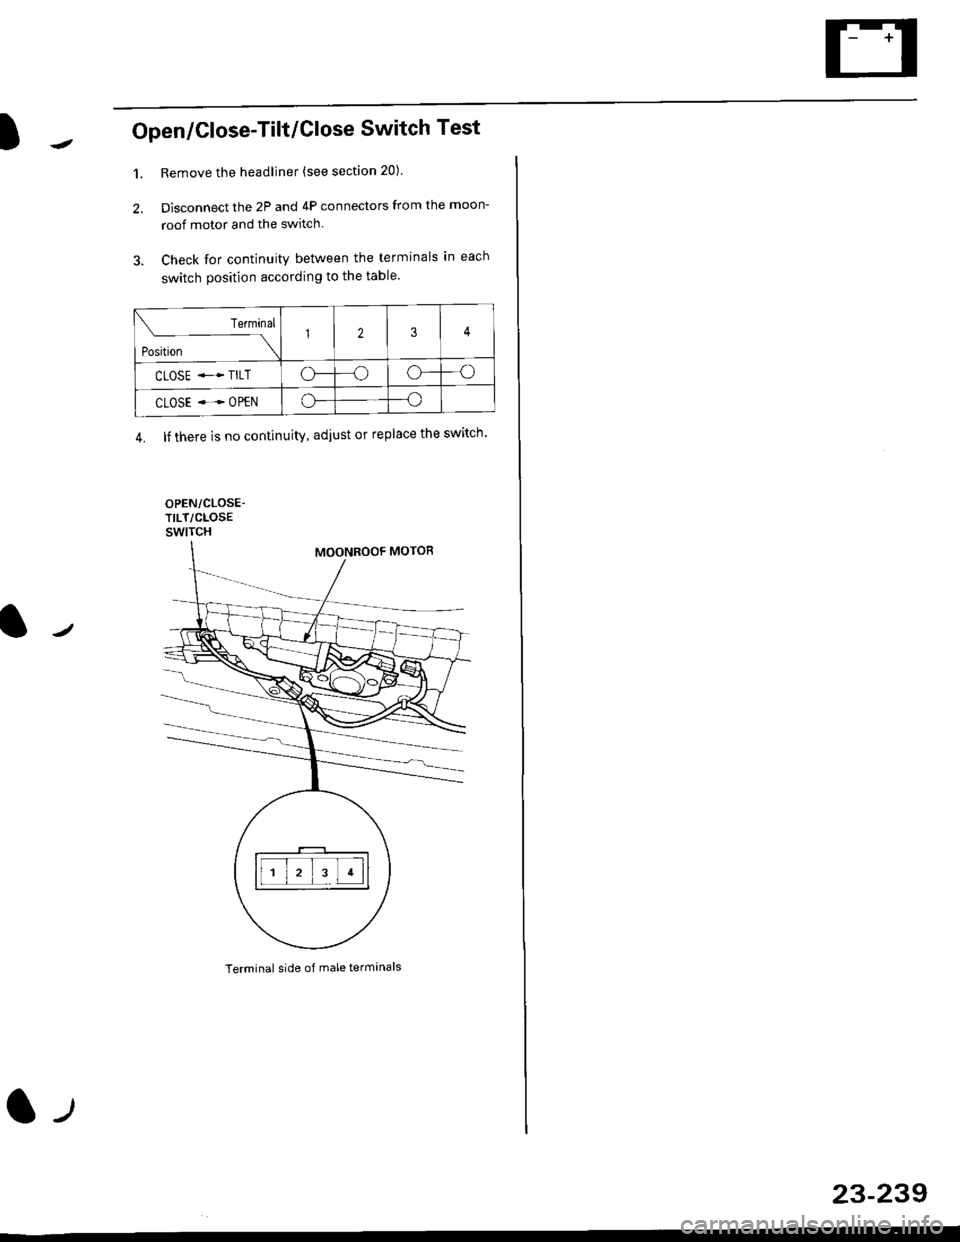 HONDA CIVIC 1998 6.G Workshop Manual Open/Close-Tilt/Close Switch Test
1. Remove the headliner (see section 20).
2. Disconnect the 2P and 4P connectors from the moon-
roof motor and the switch.
3. Check for continuity between the termina